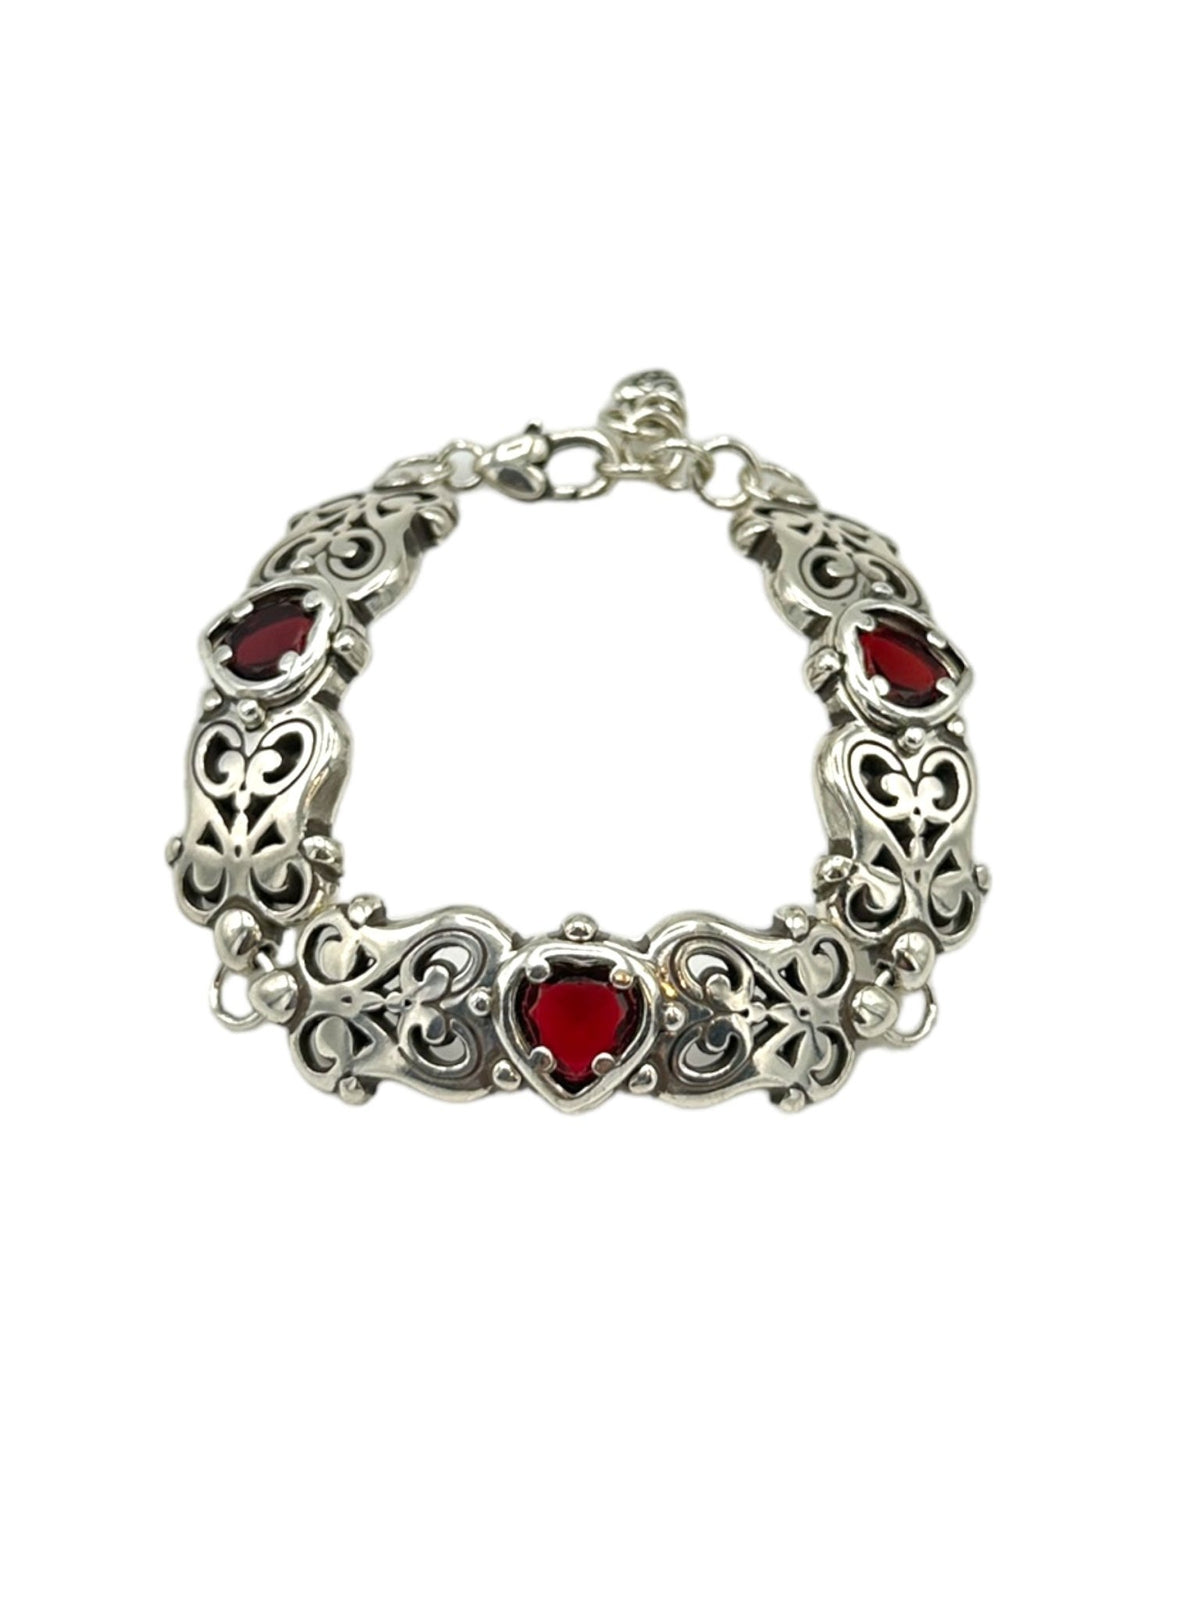 Brighton Retired Jewelry ‘Endless Love’ Red Heart Crystal Silver Bracelet - 24 Wishes Vintage Jewelry